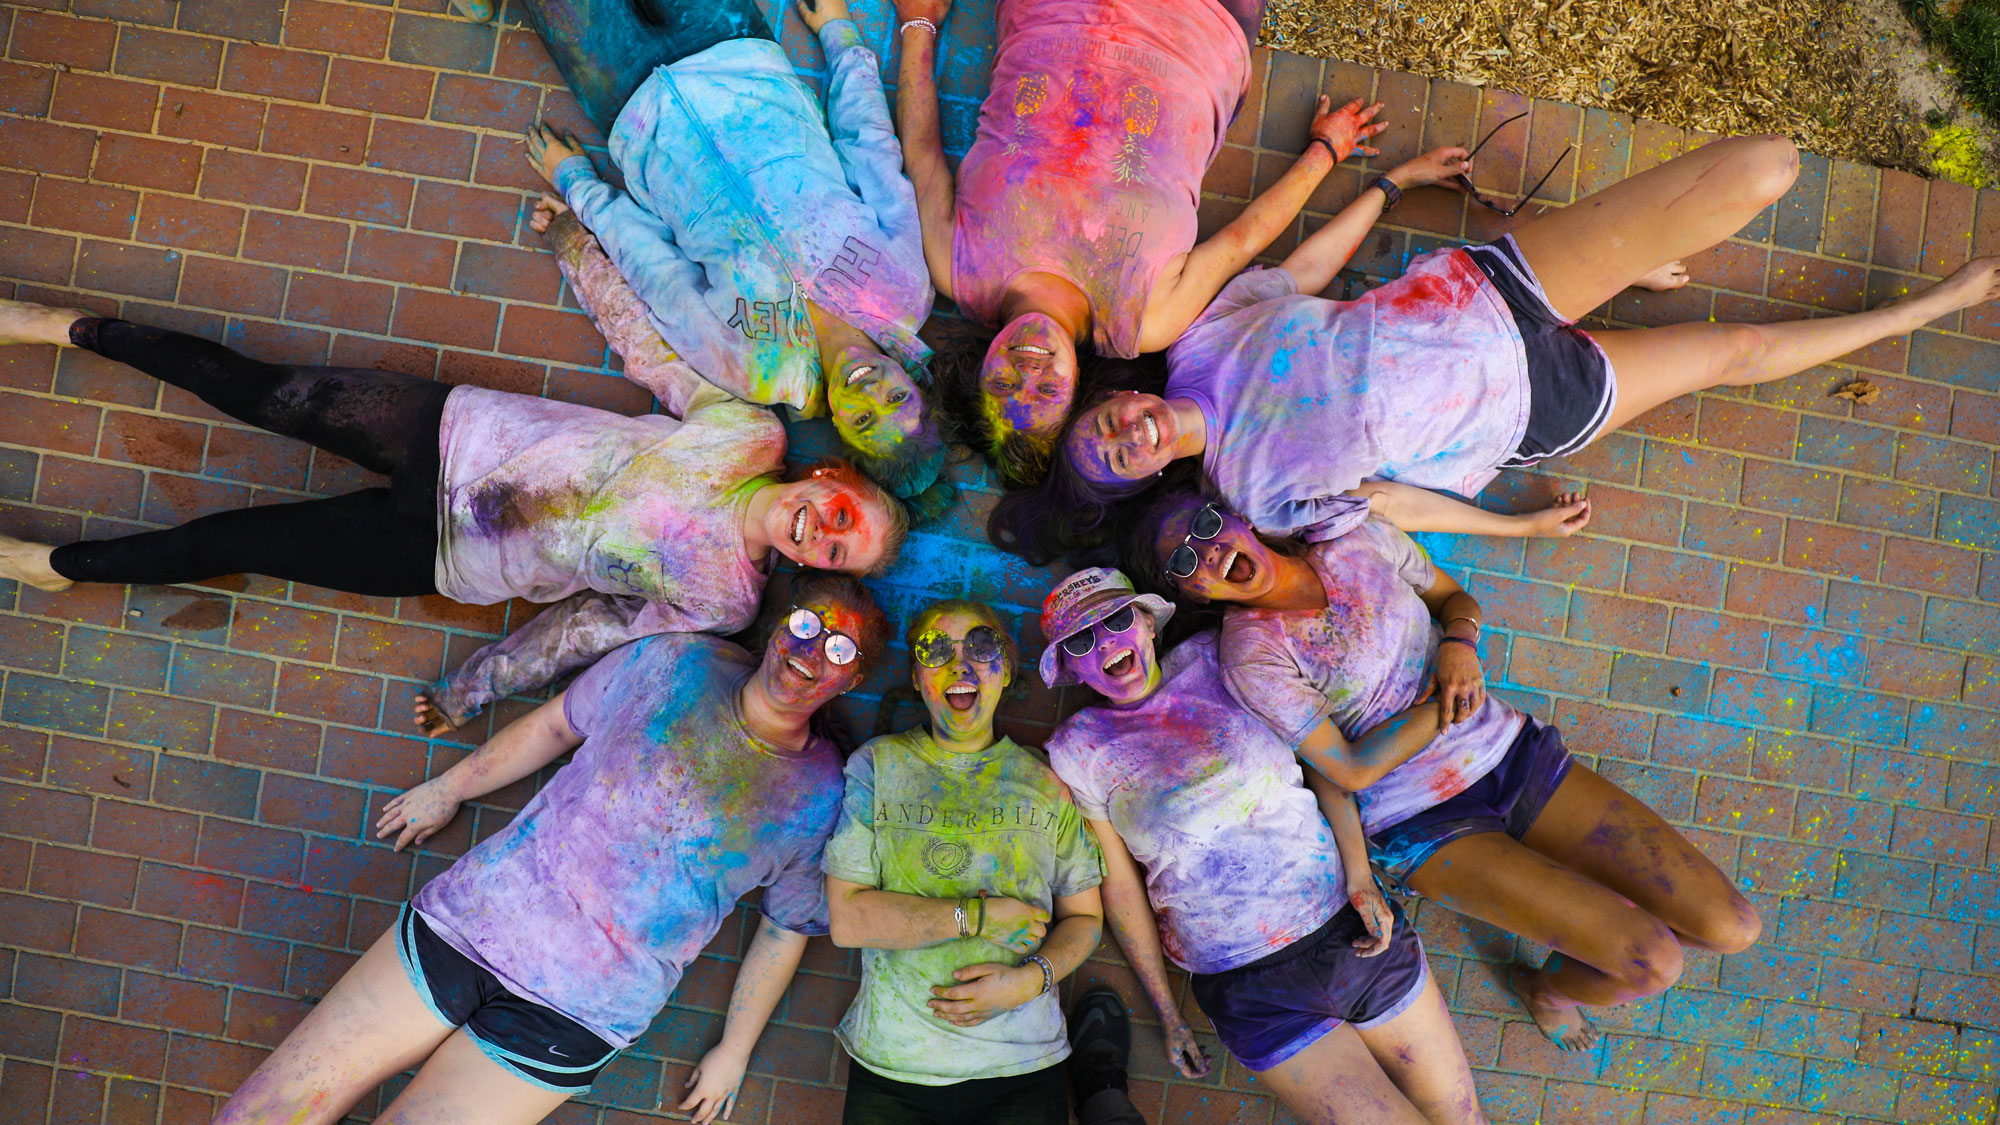 Students covered in splotches of paint and smiling, having just participated in the Holi festival